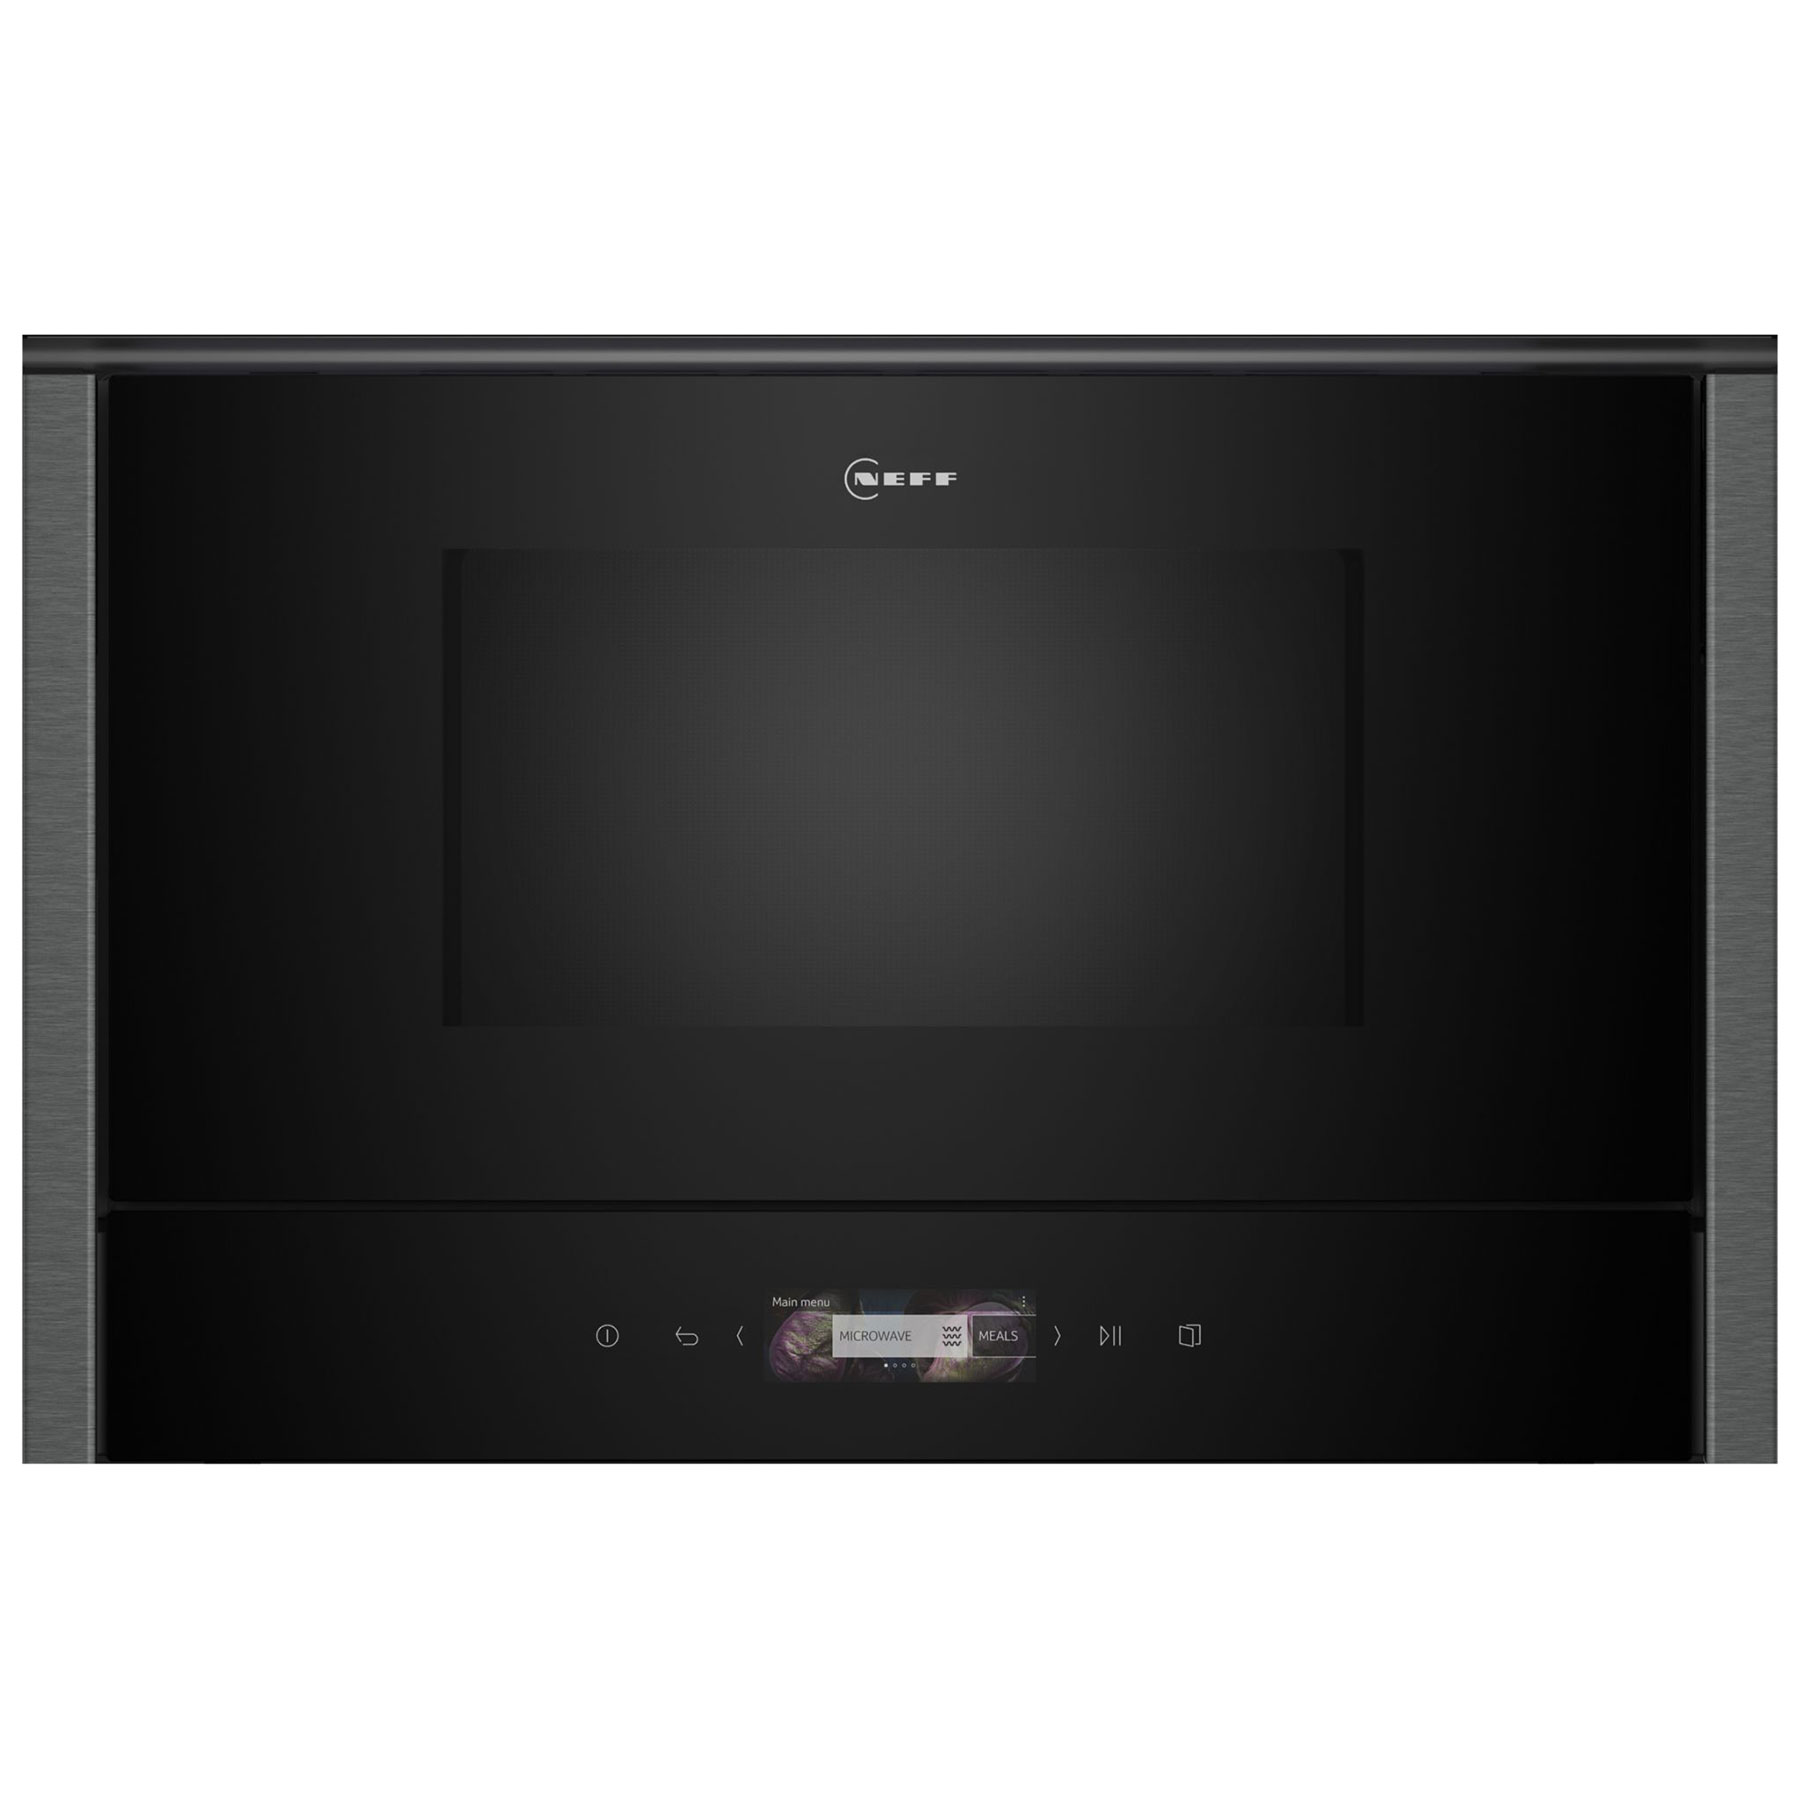 Image of Neff NL4WR21G1B N70 Built In Microwave Oven Black 900W Left Hinged